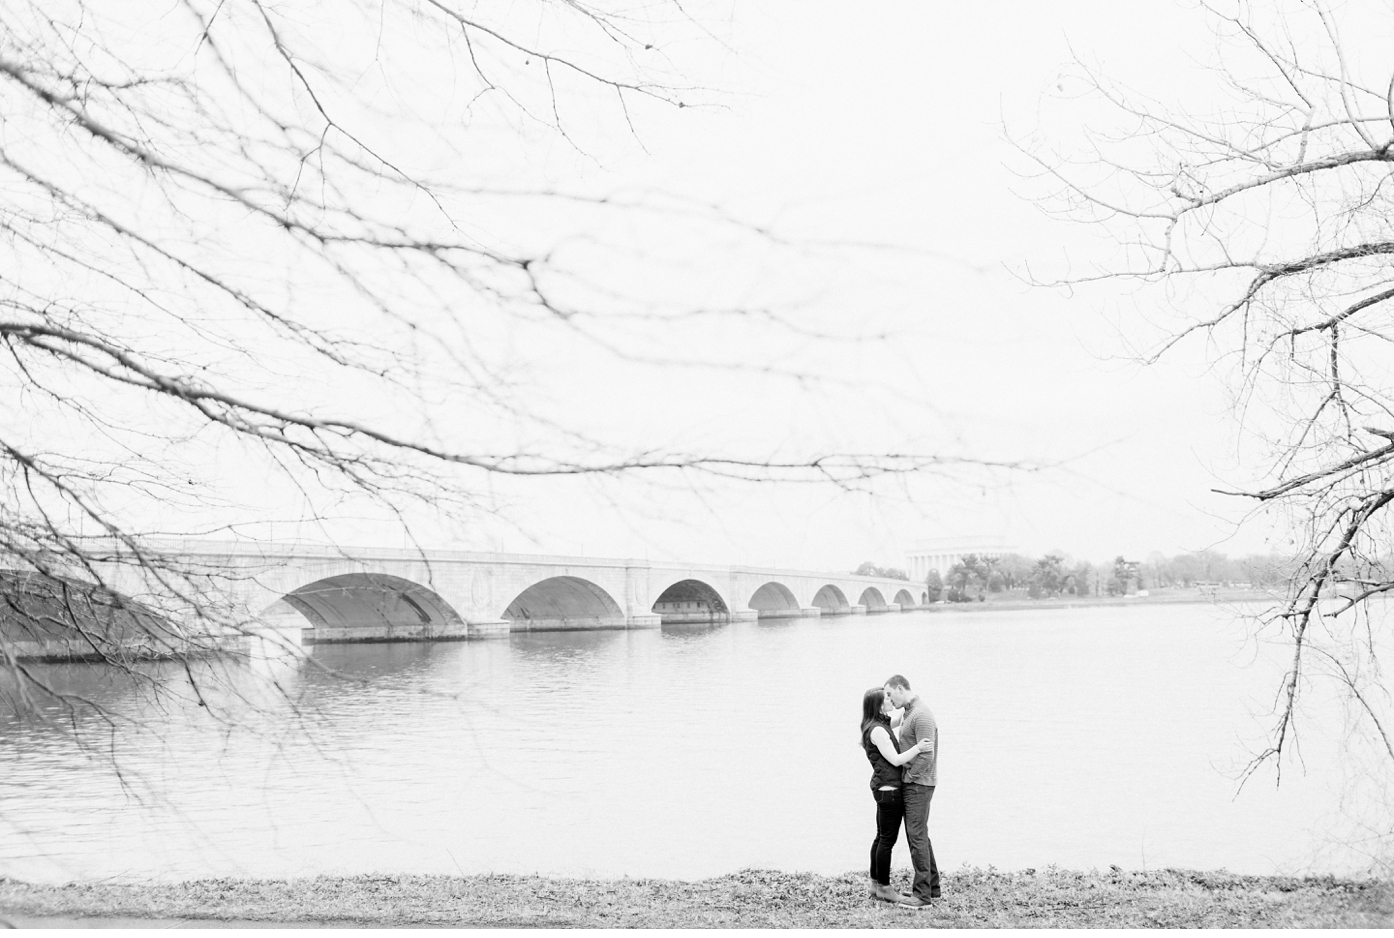 Washington DC Sunrise Engagement Session at the Lincoln Memorial